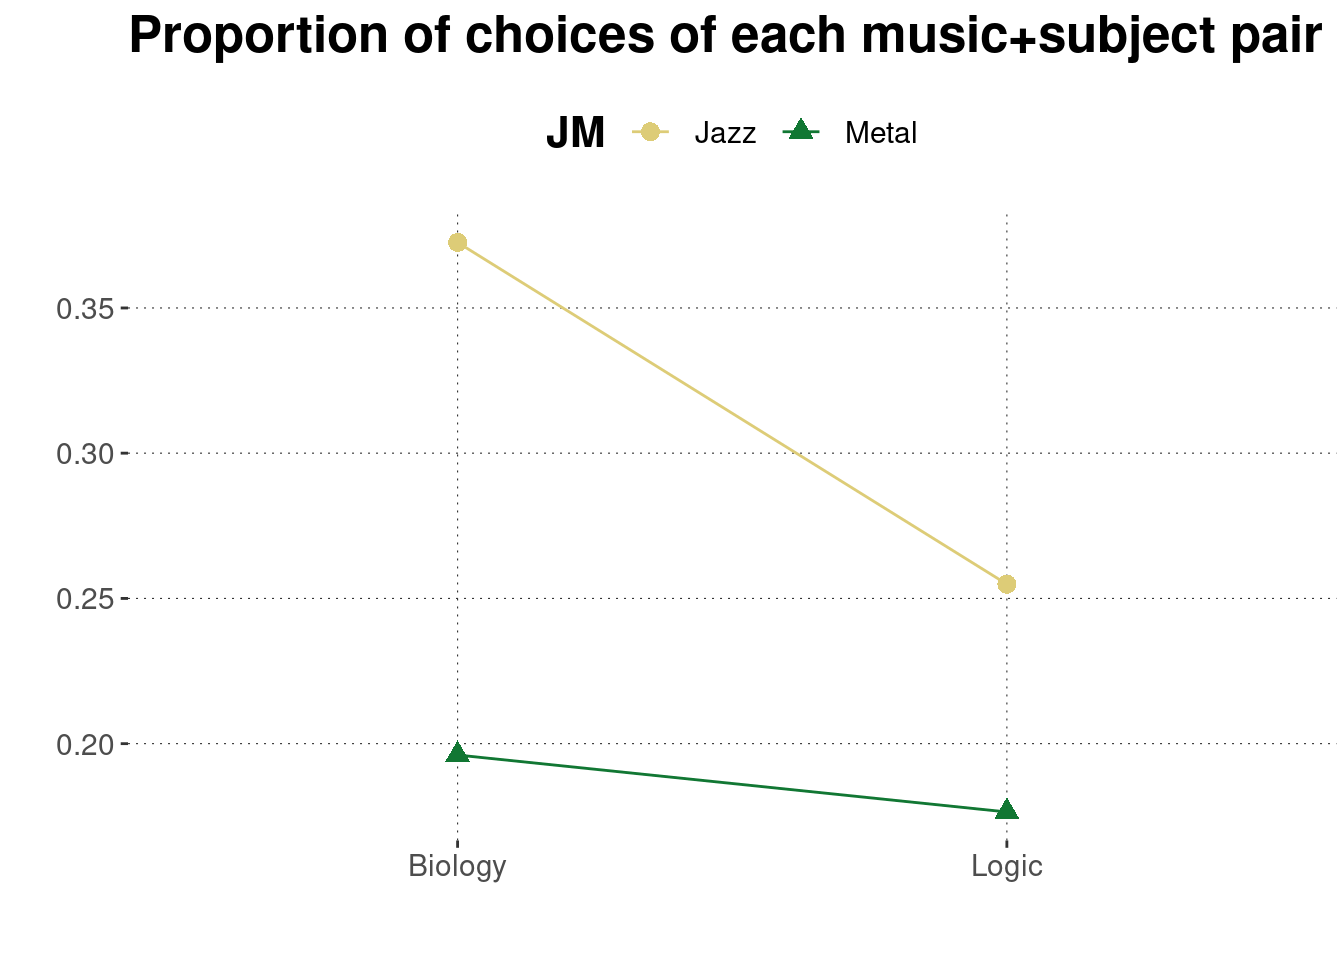 Proportions of jointly choosing a musical style and an academic subfield in the Bio-Logic Jazz-Metal data set.